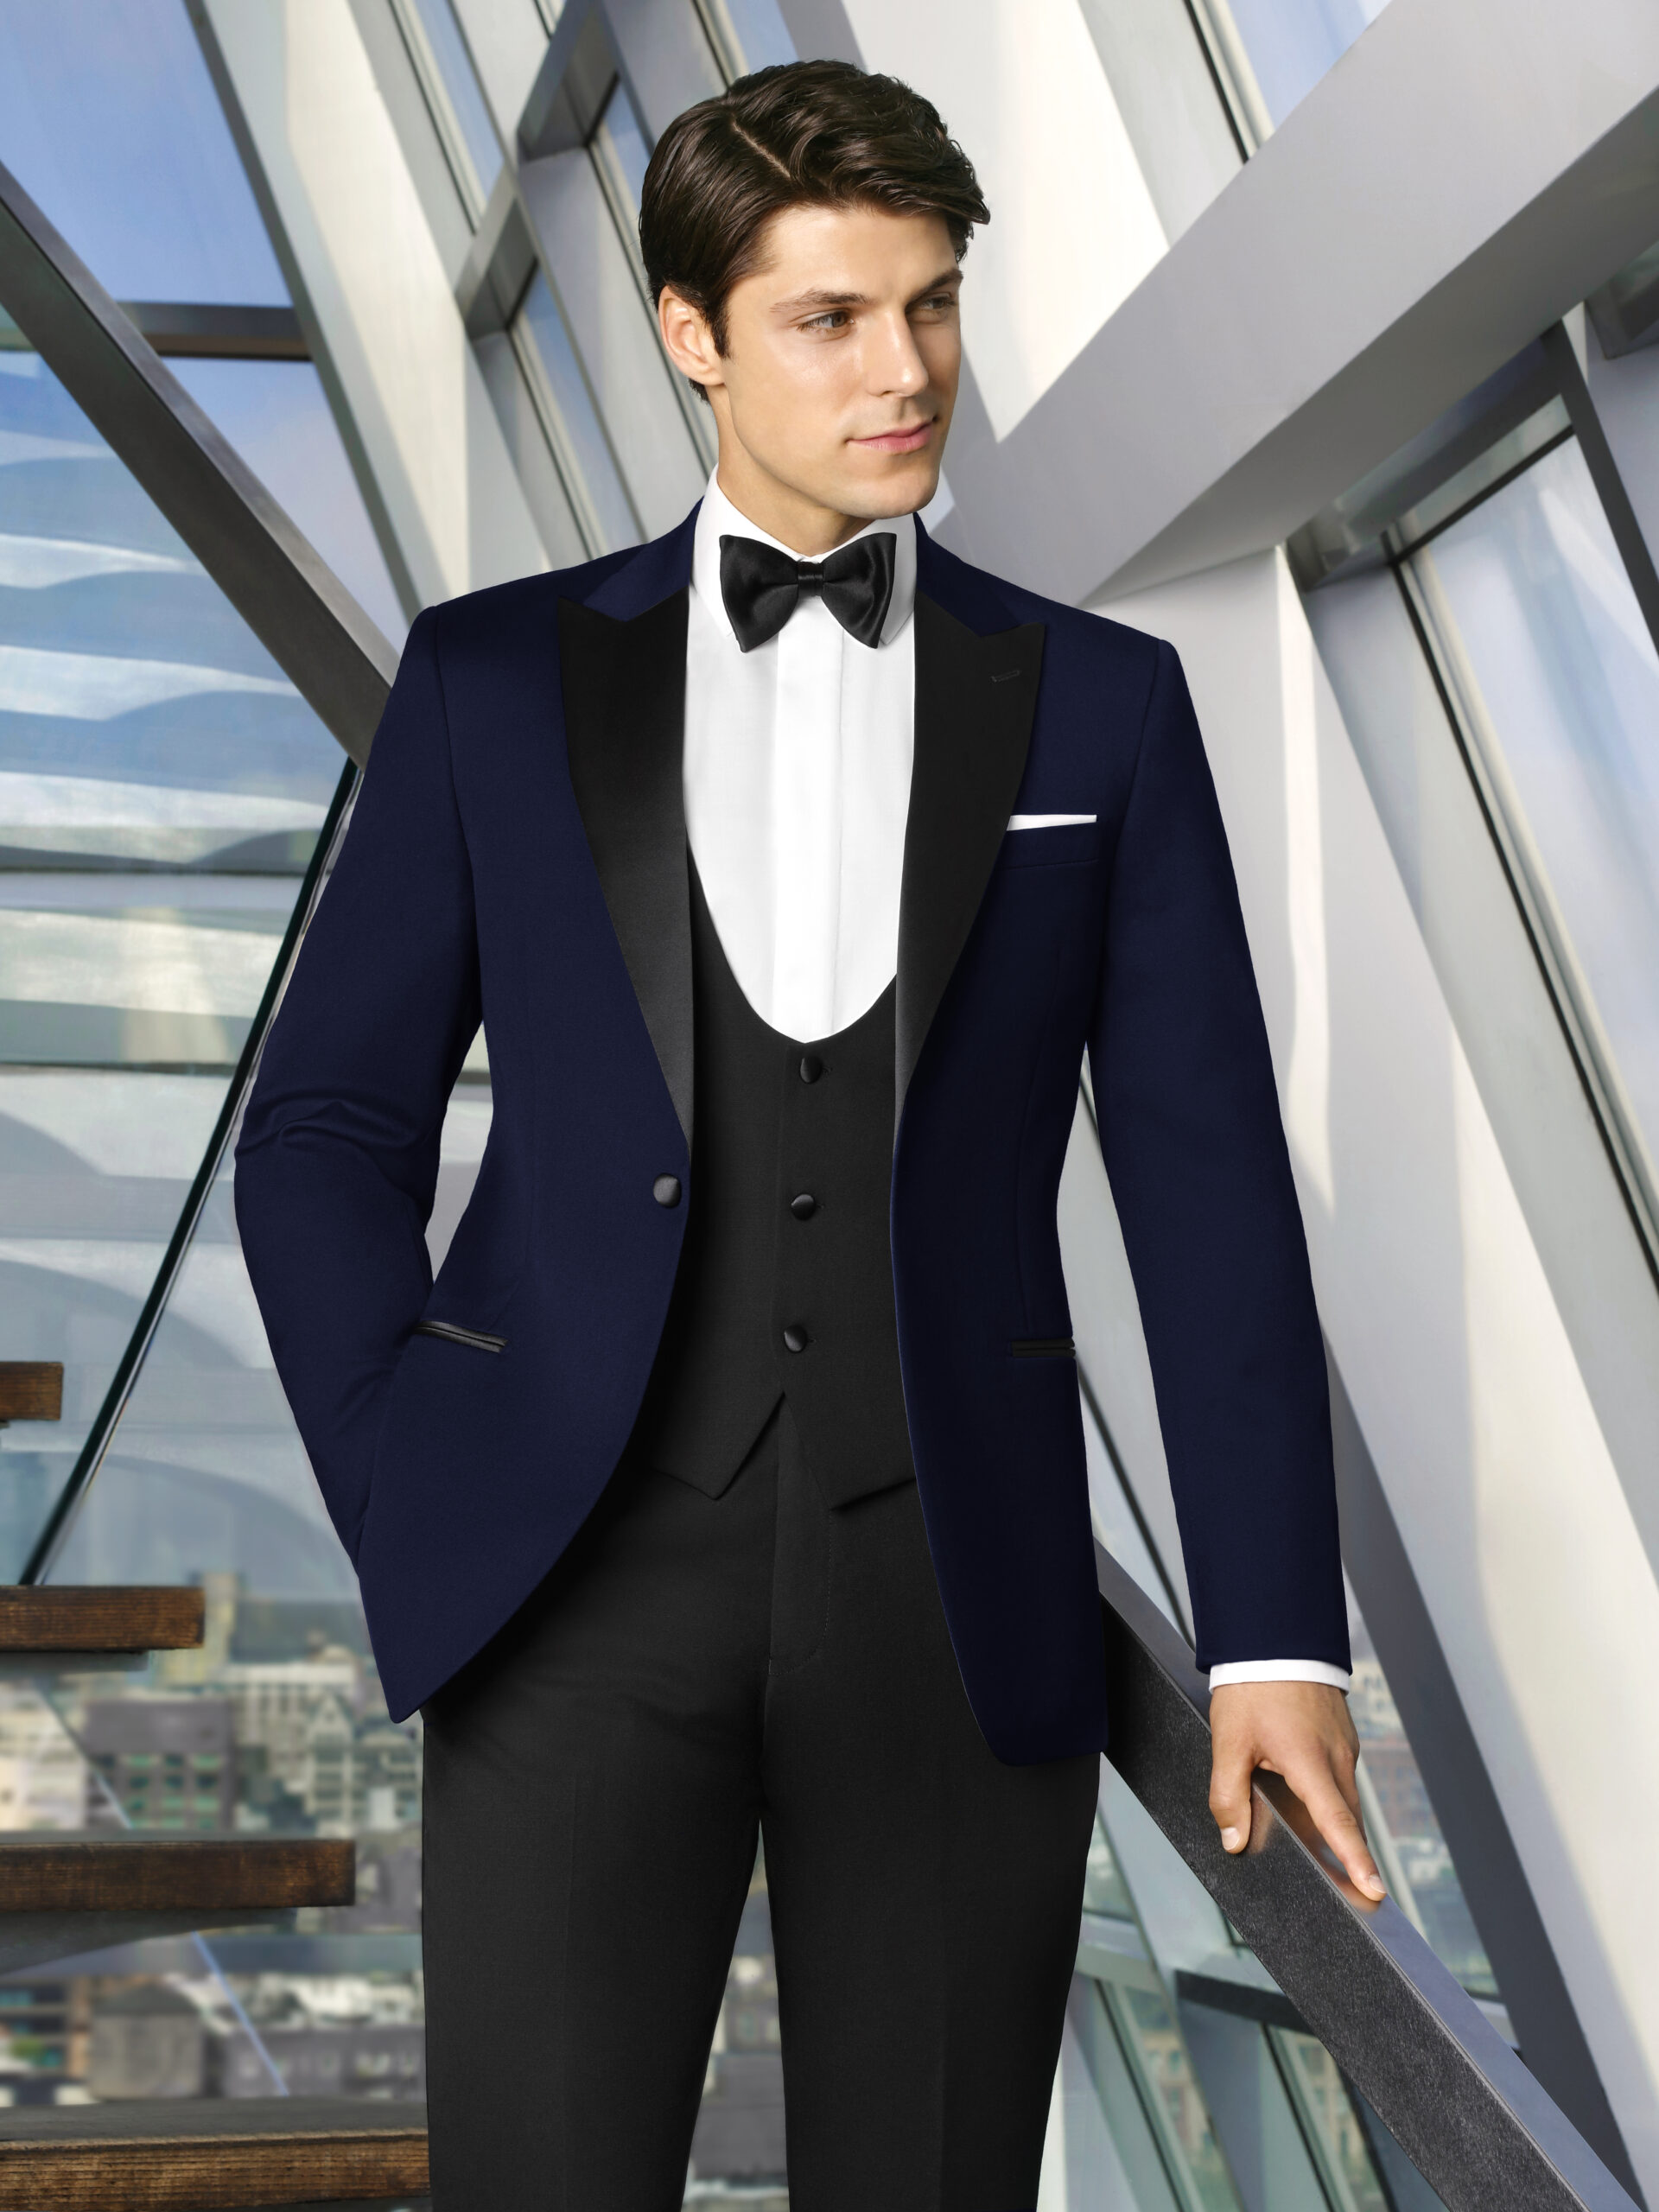 Exclusive Tuxedo Rentals at an Affordable Price | Tuxedo Rentals